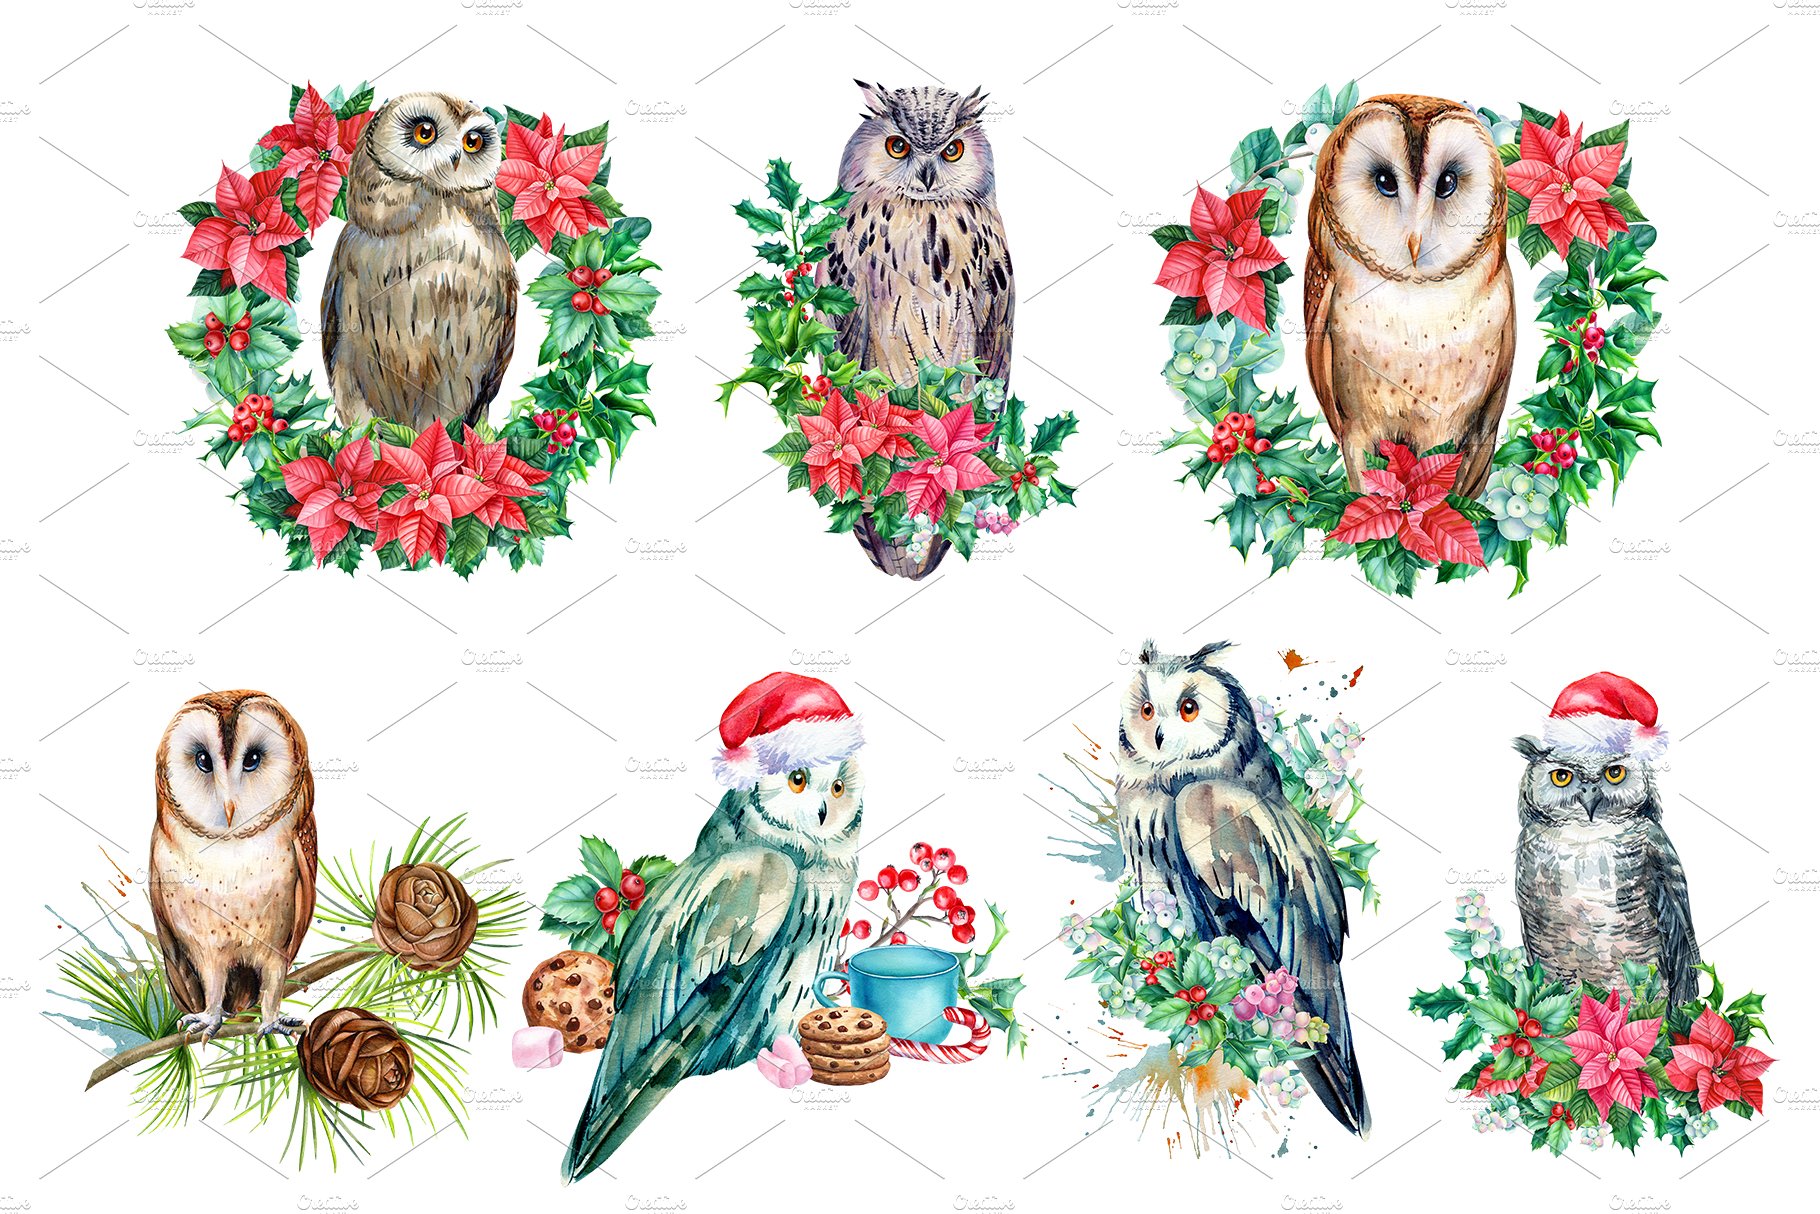 Watercolor Christmas Flowers and Owl.